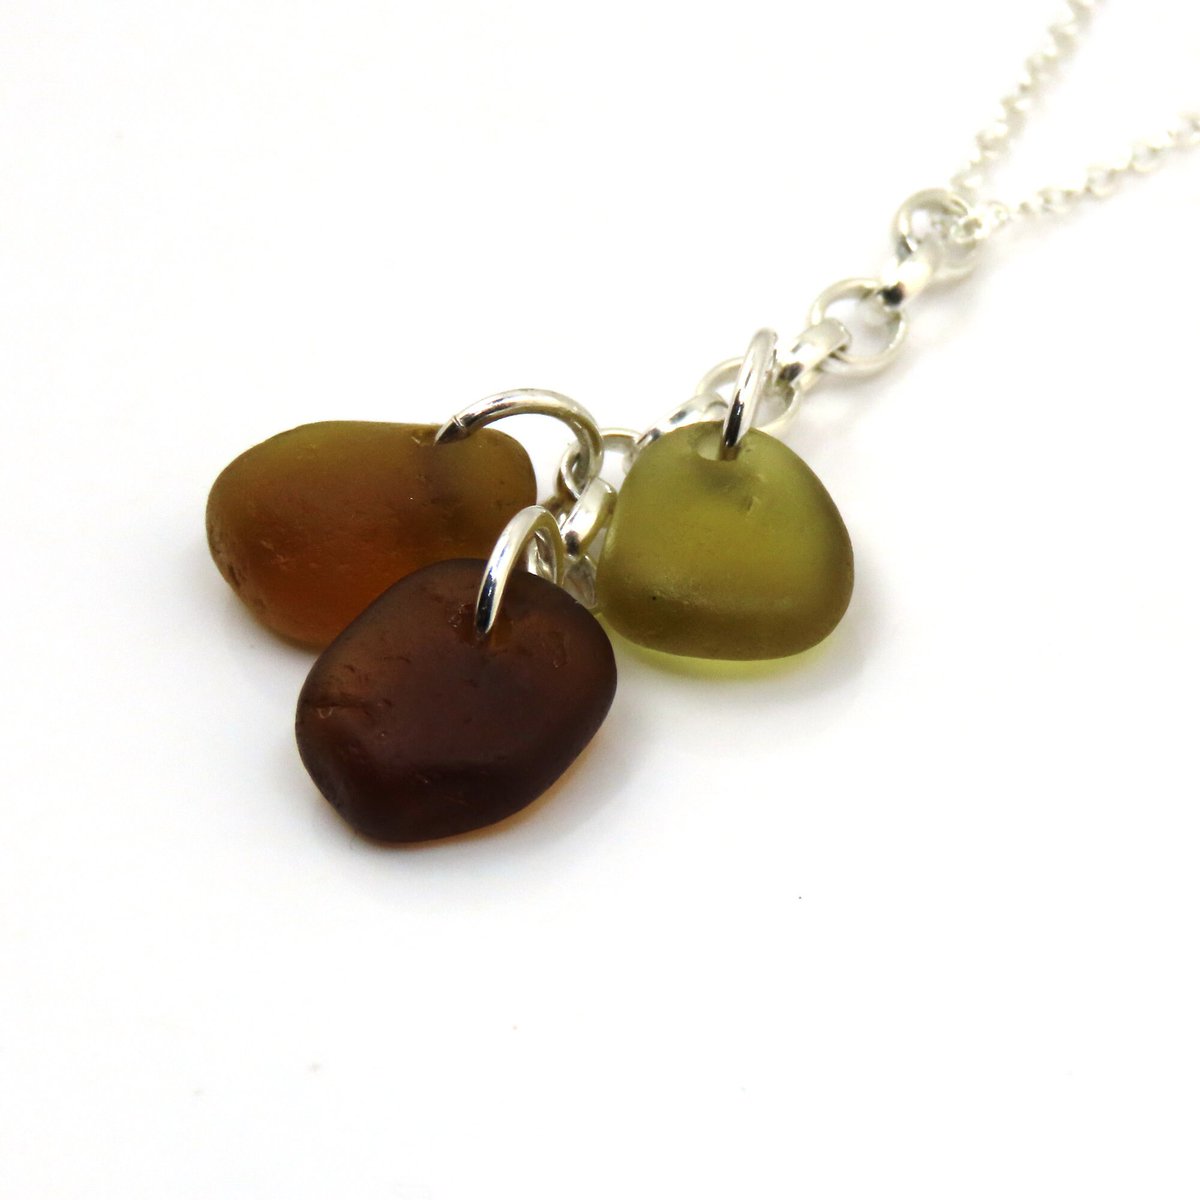 Sea Glass Trio Necklace, GENUINE, Pendant Necklace, Citron, Peridot and Caramel Sea Glass Cluster Necklace, Autumnal Colours tuppu.net/dadb211e #shopindie #UKGiftAM #EarlyBiz #MHHSBD #craftbizparty #UKGiftHour #HandmadeHour #womaninbizhour